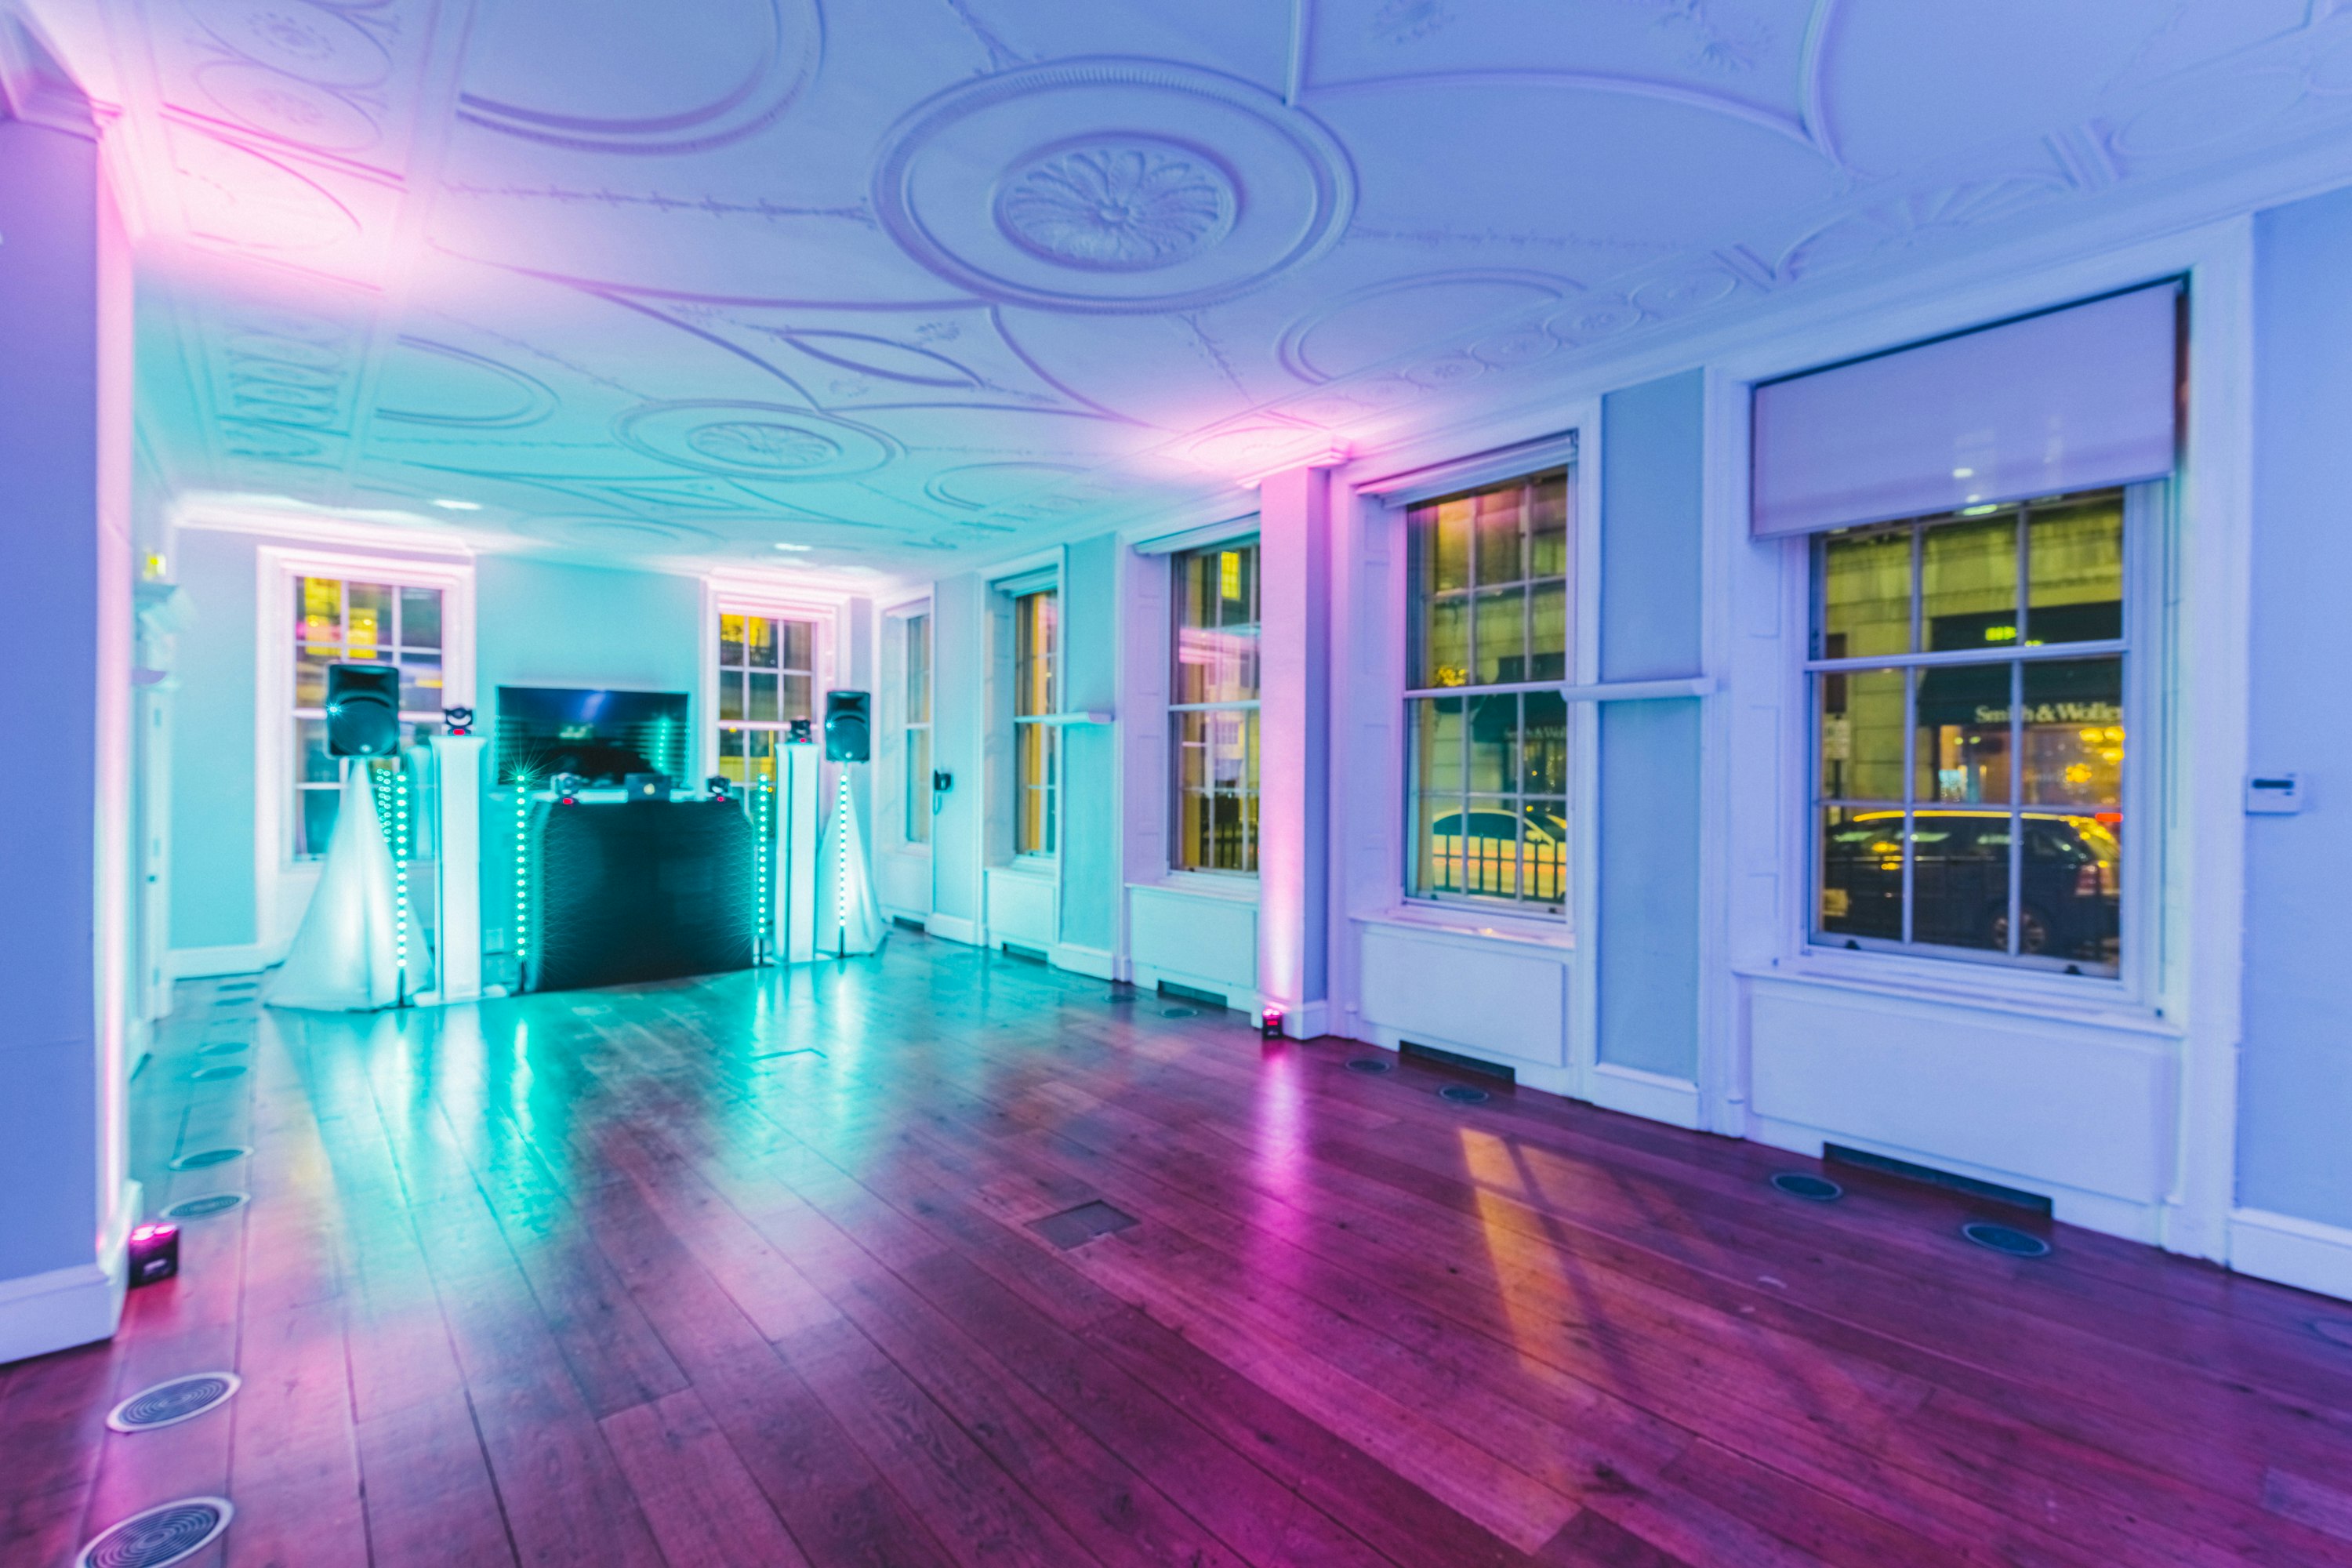 Small Party Venues in London - RSA House - Events in The Tavern Room - Banner